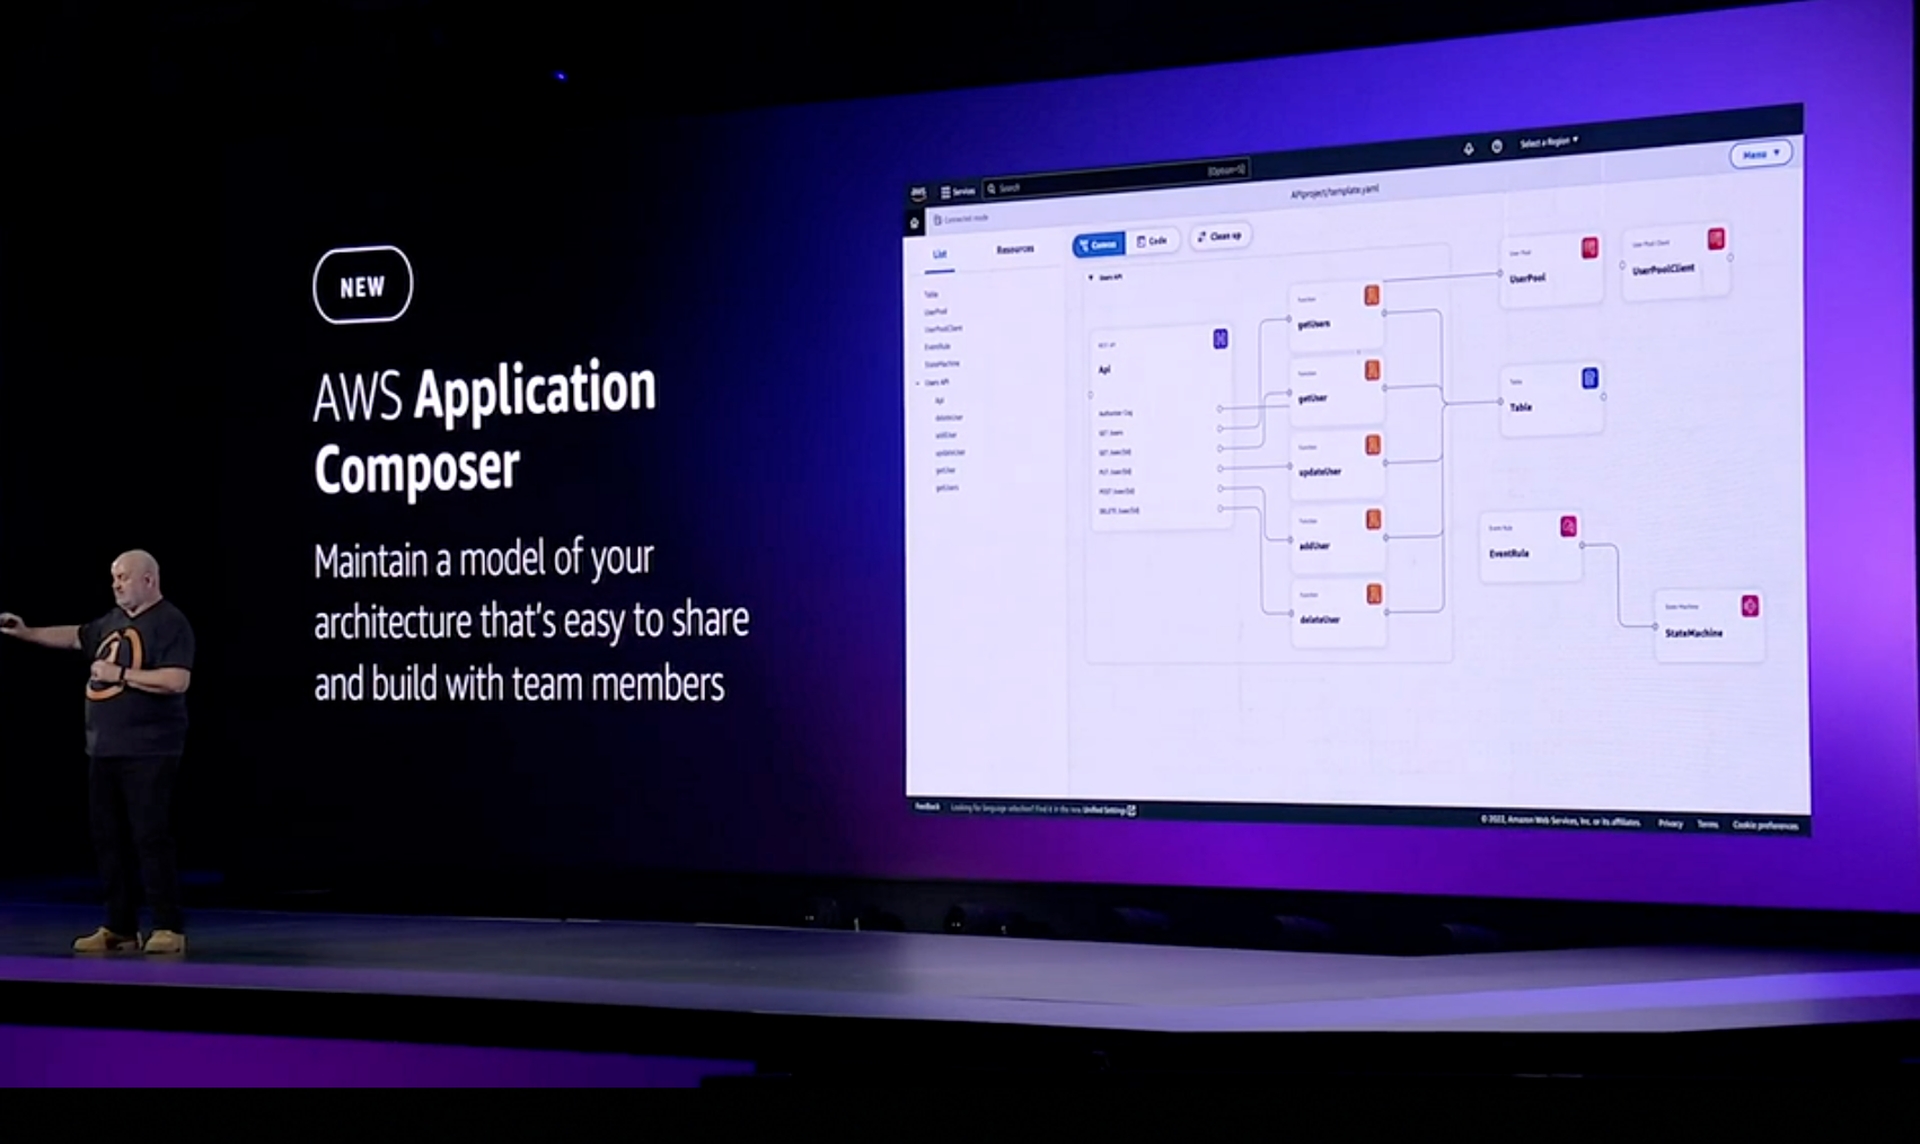 AWS unveiled the AWS Application Composer, a new low-code tool for graphically planning and creating serverless apps, at its re:Invent conference. The...